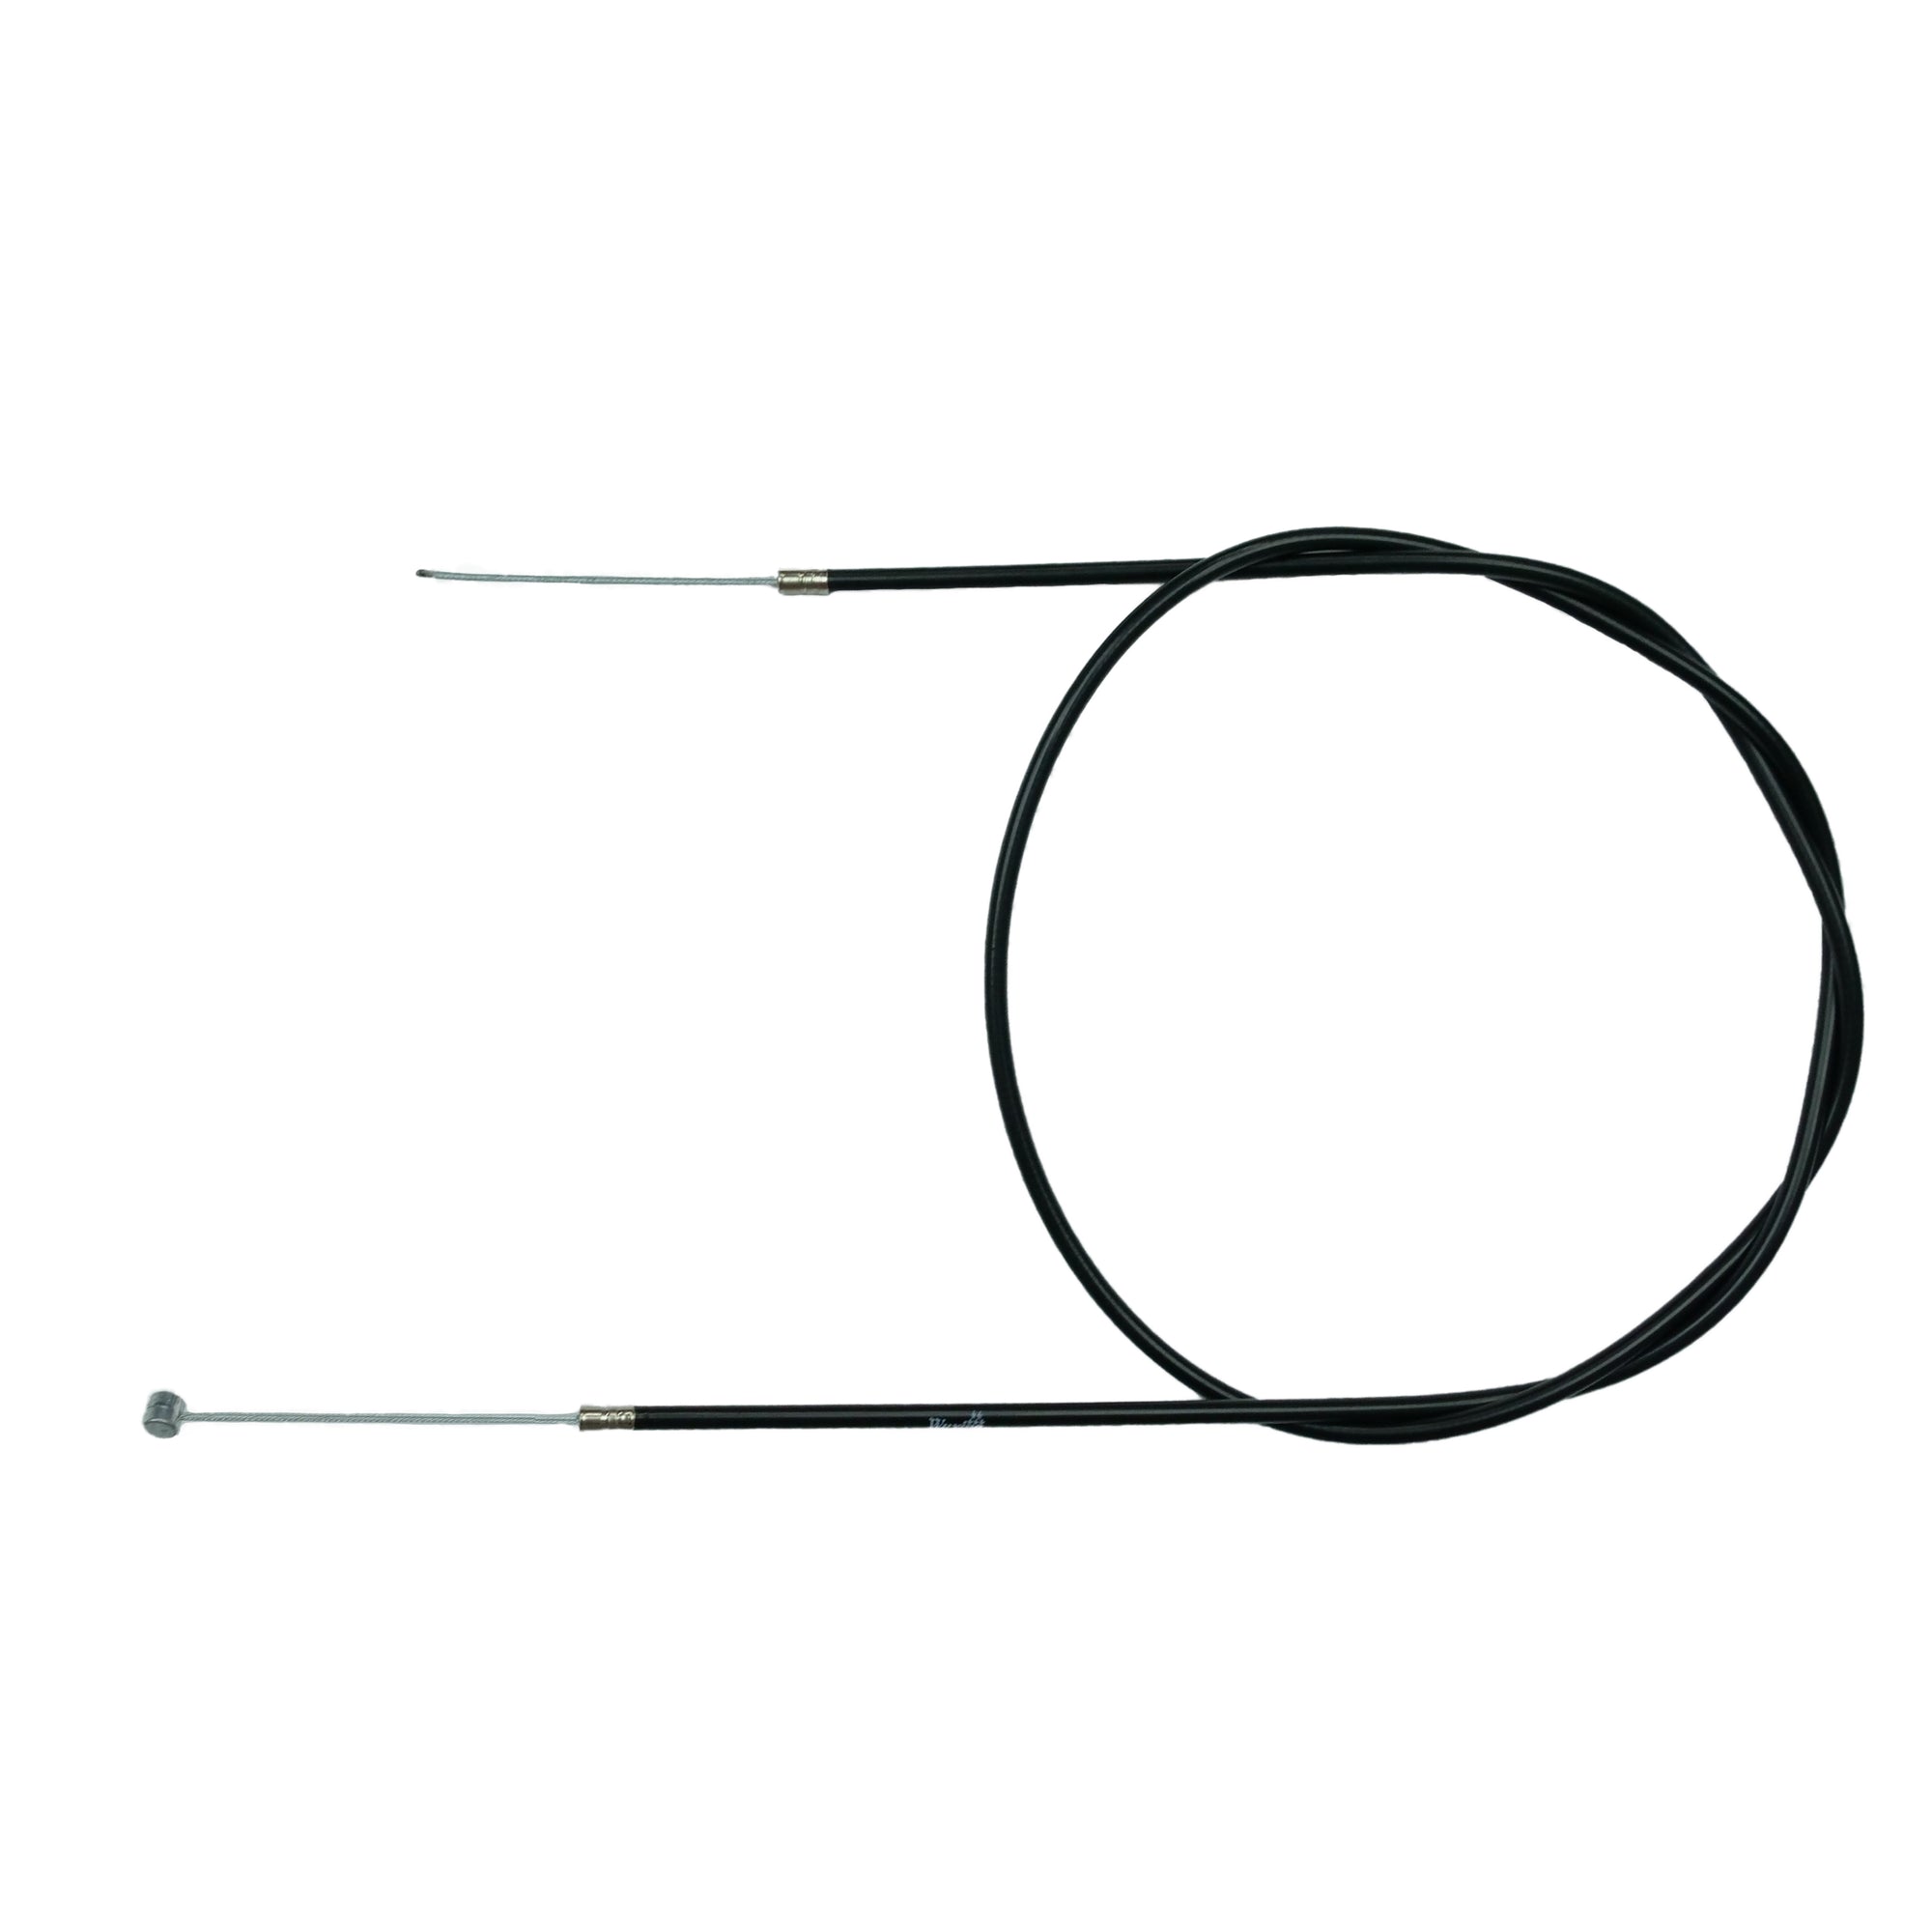 Brake Cable for the EMOVE Cruiser